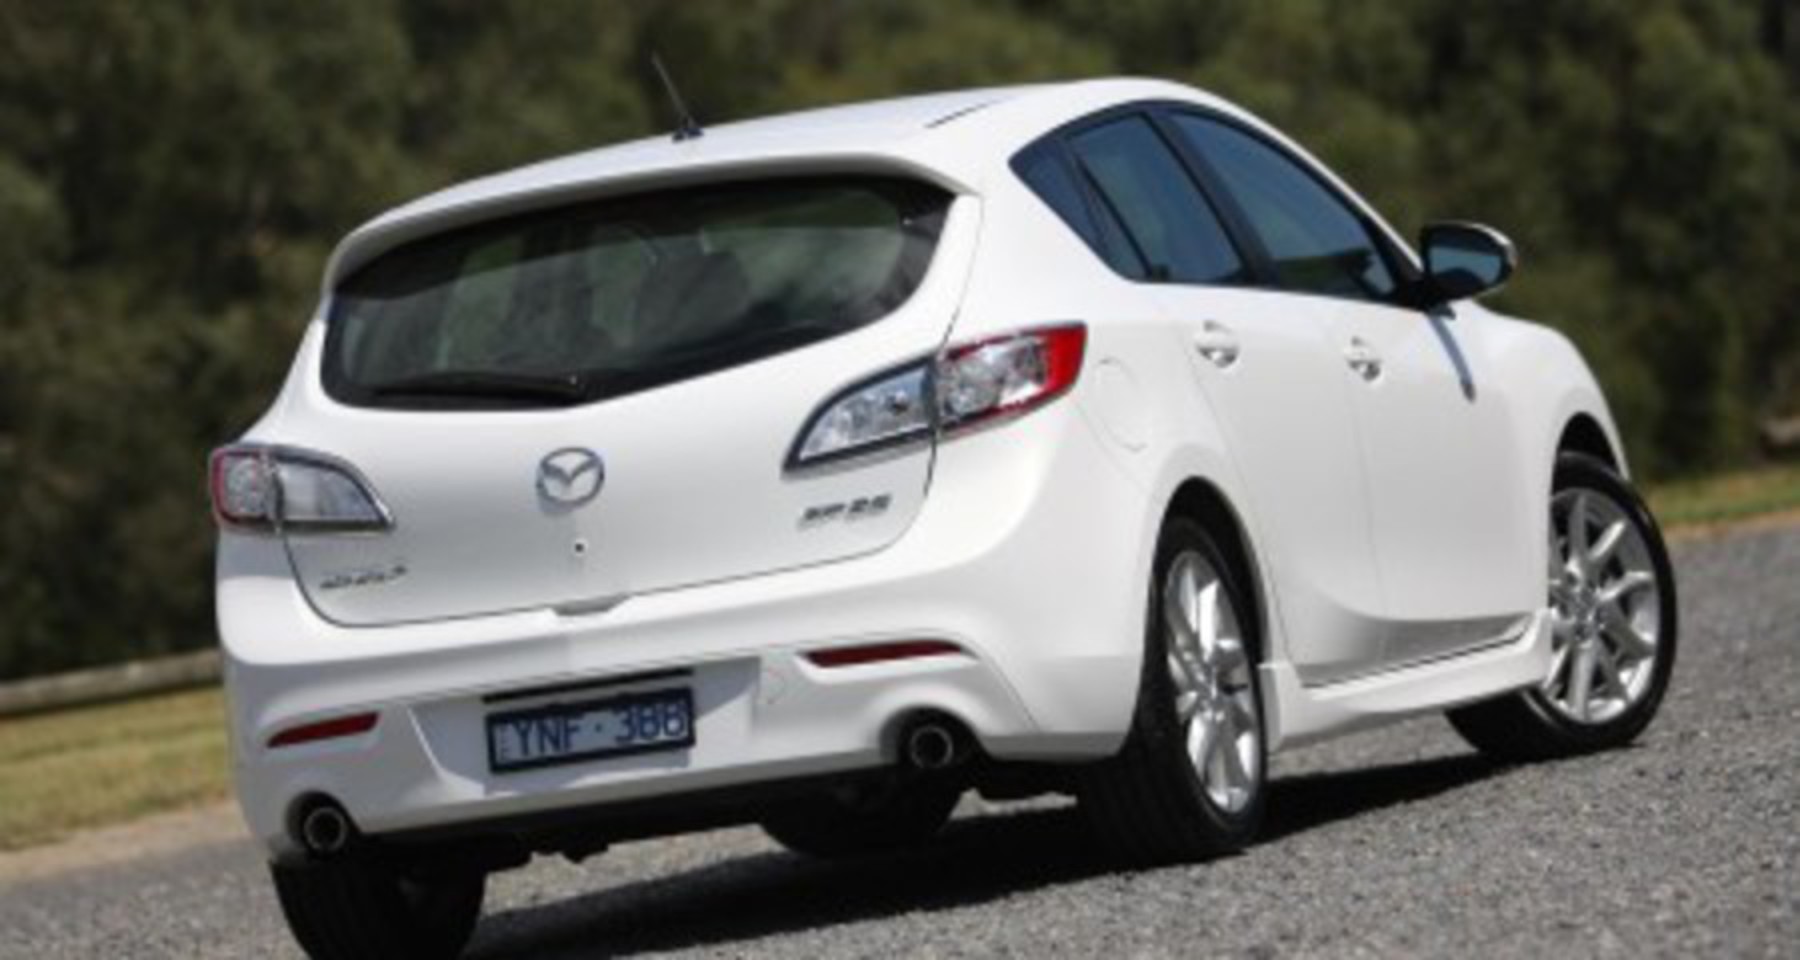 2012 Mazda3 SP25 Manual Hatch Review